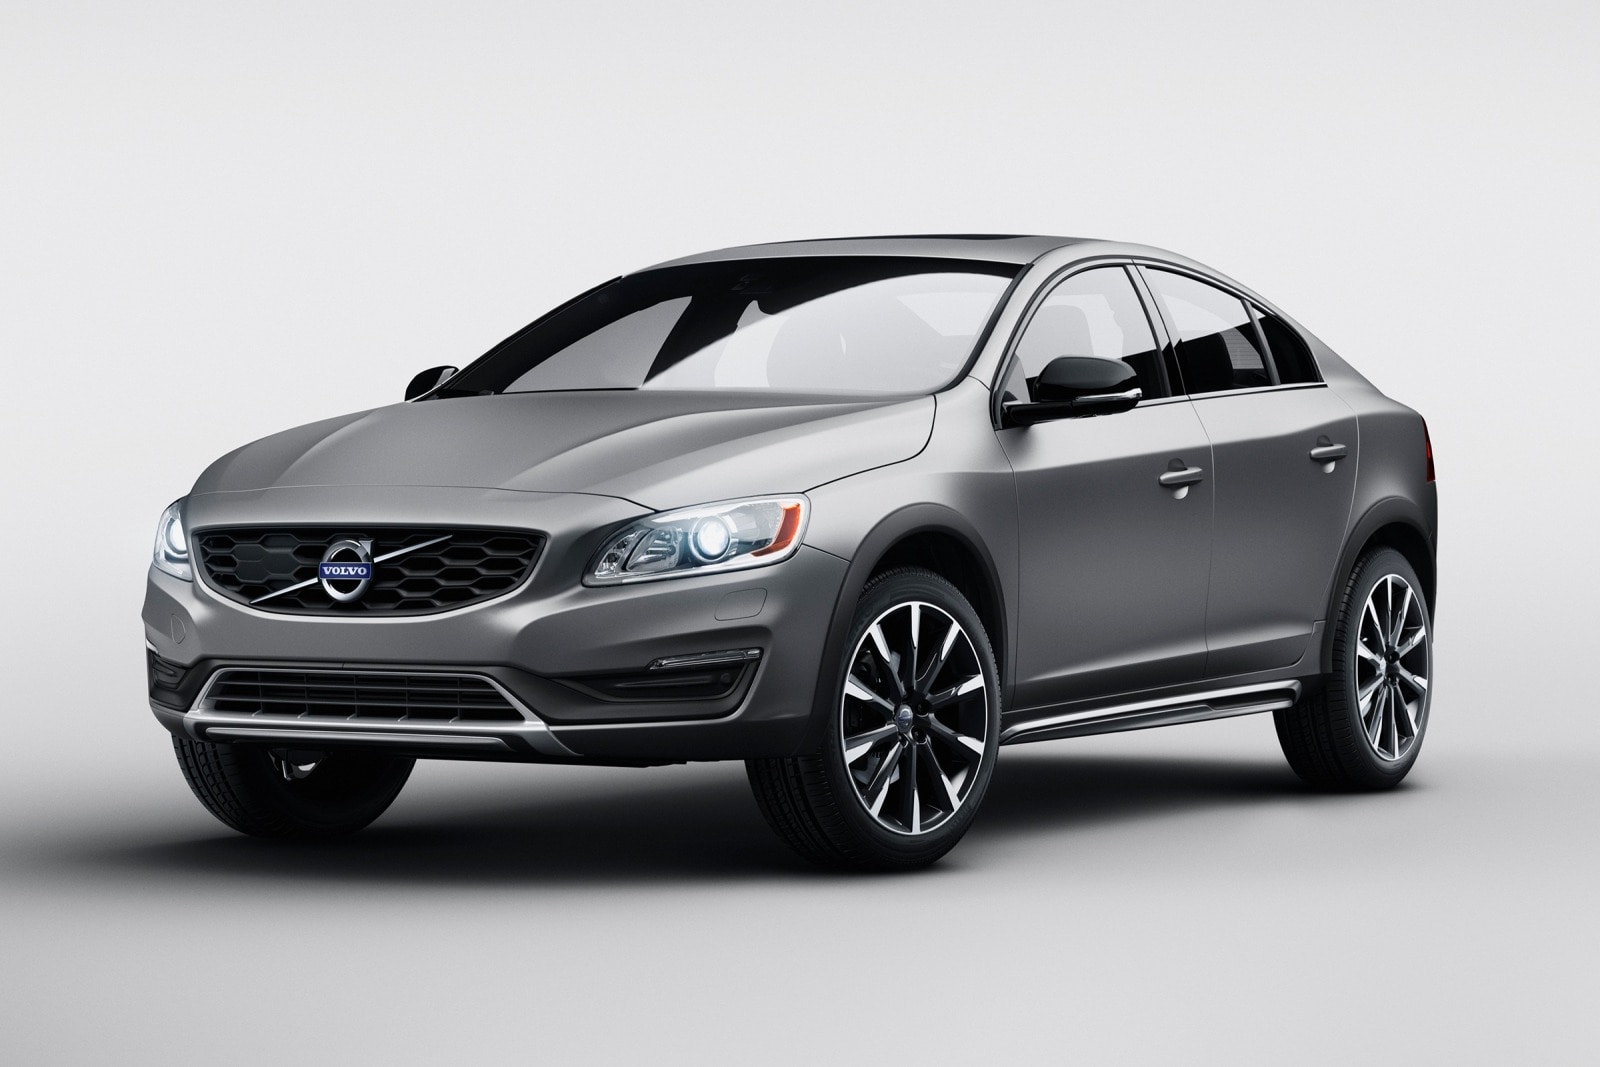 2017 Volvo S60 Cross Country Review & Ratings | Edmunds